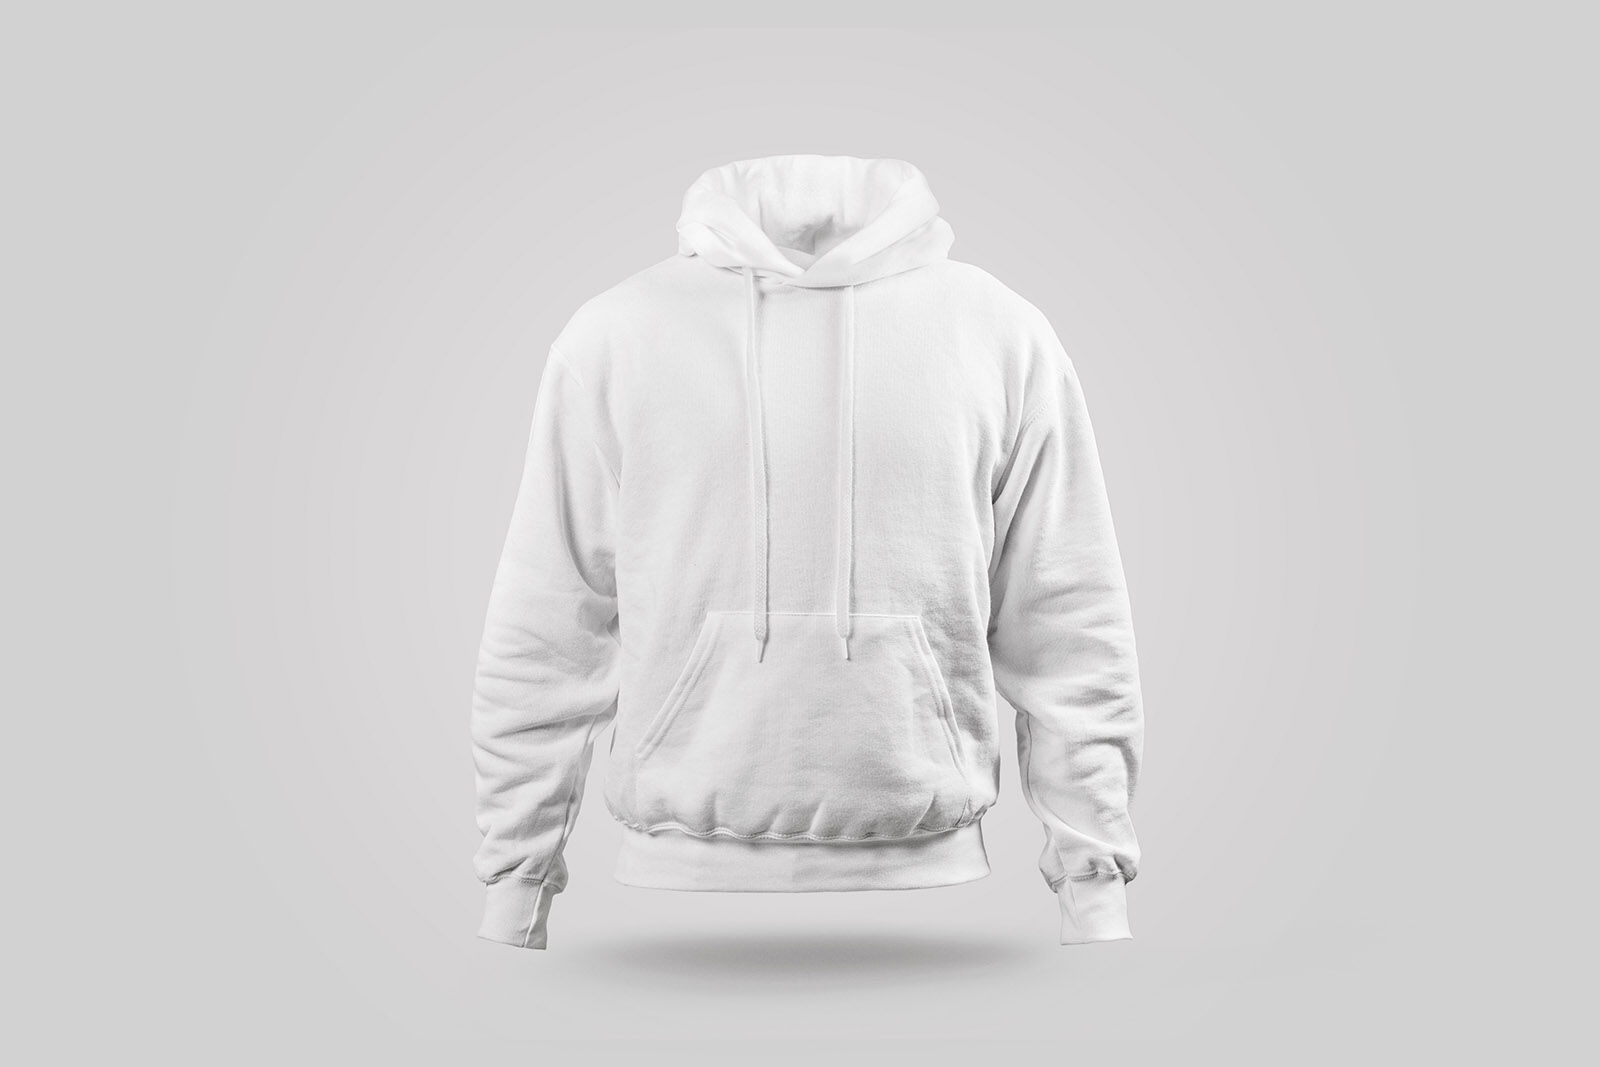 Front View of a Simple Hoodie Mockup FREE PSD